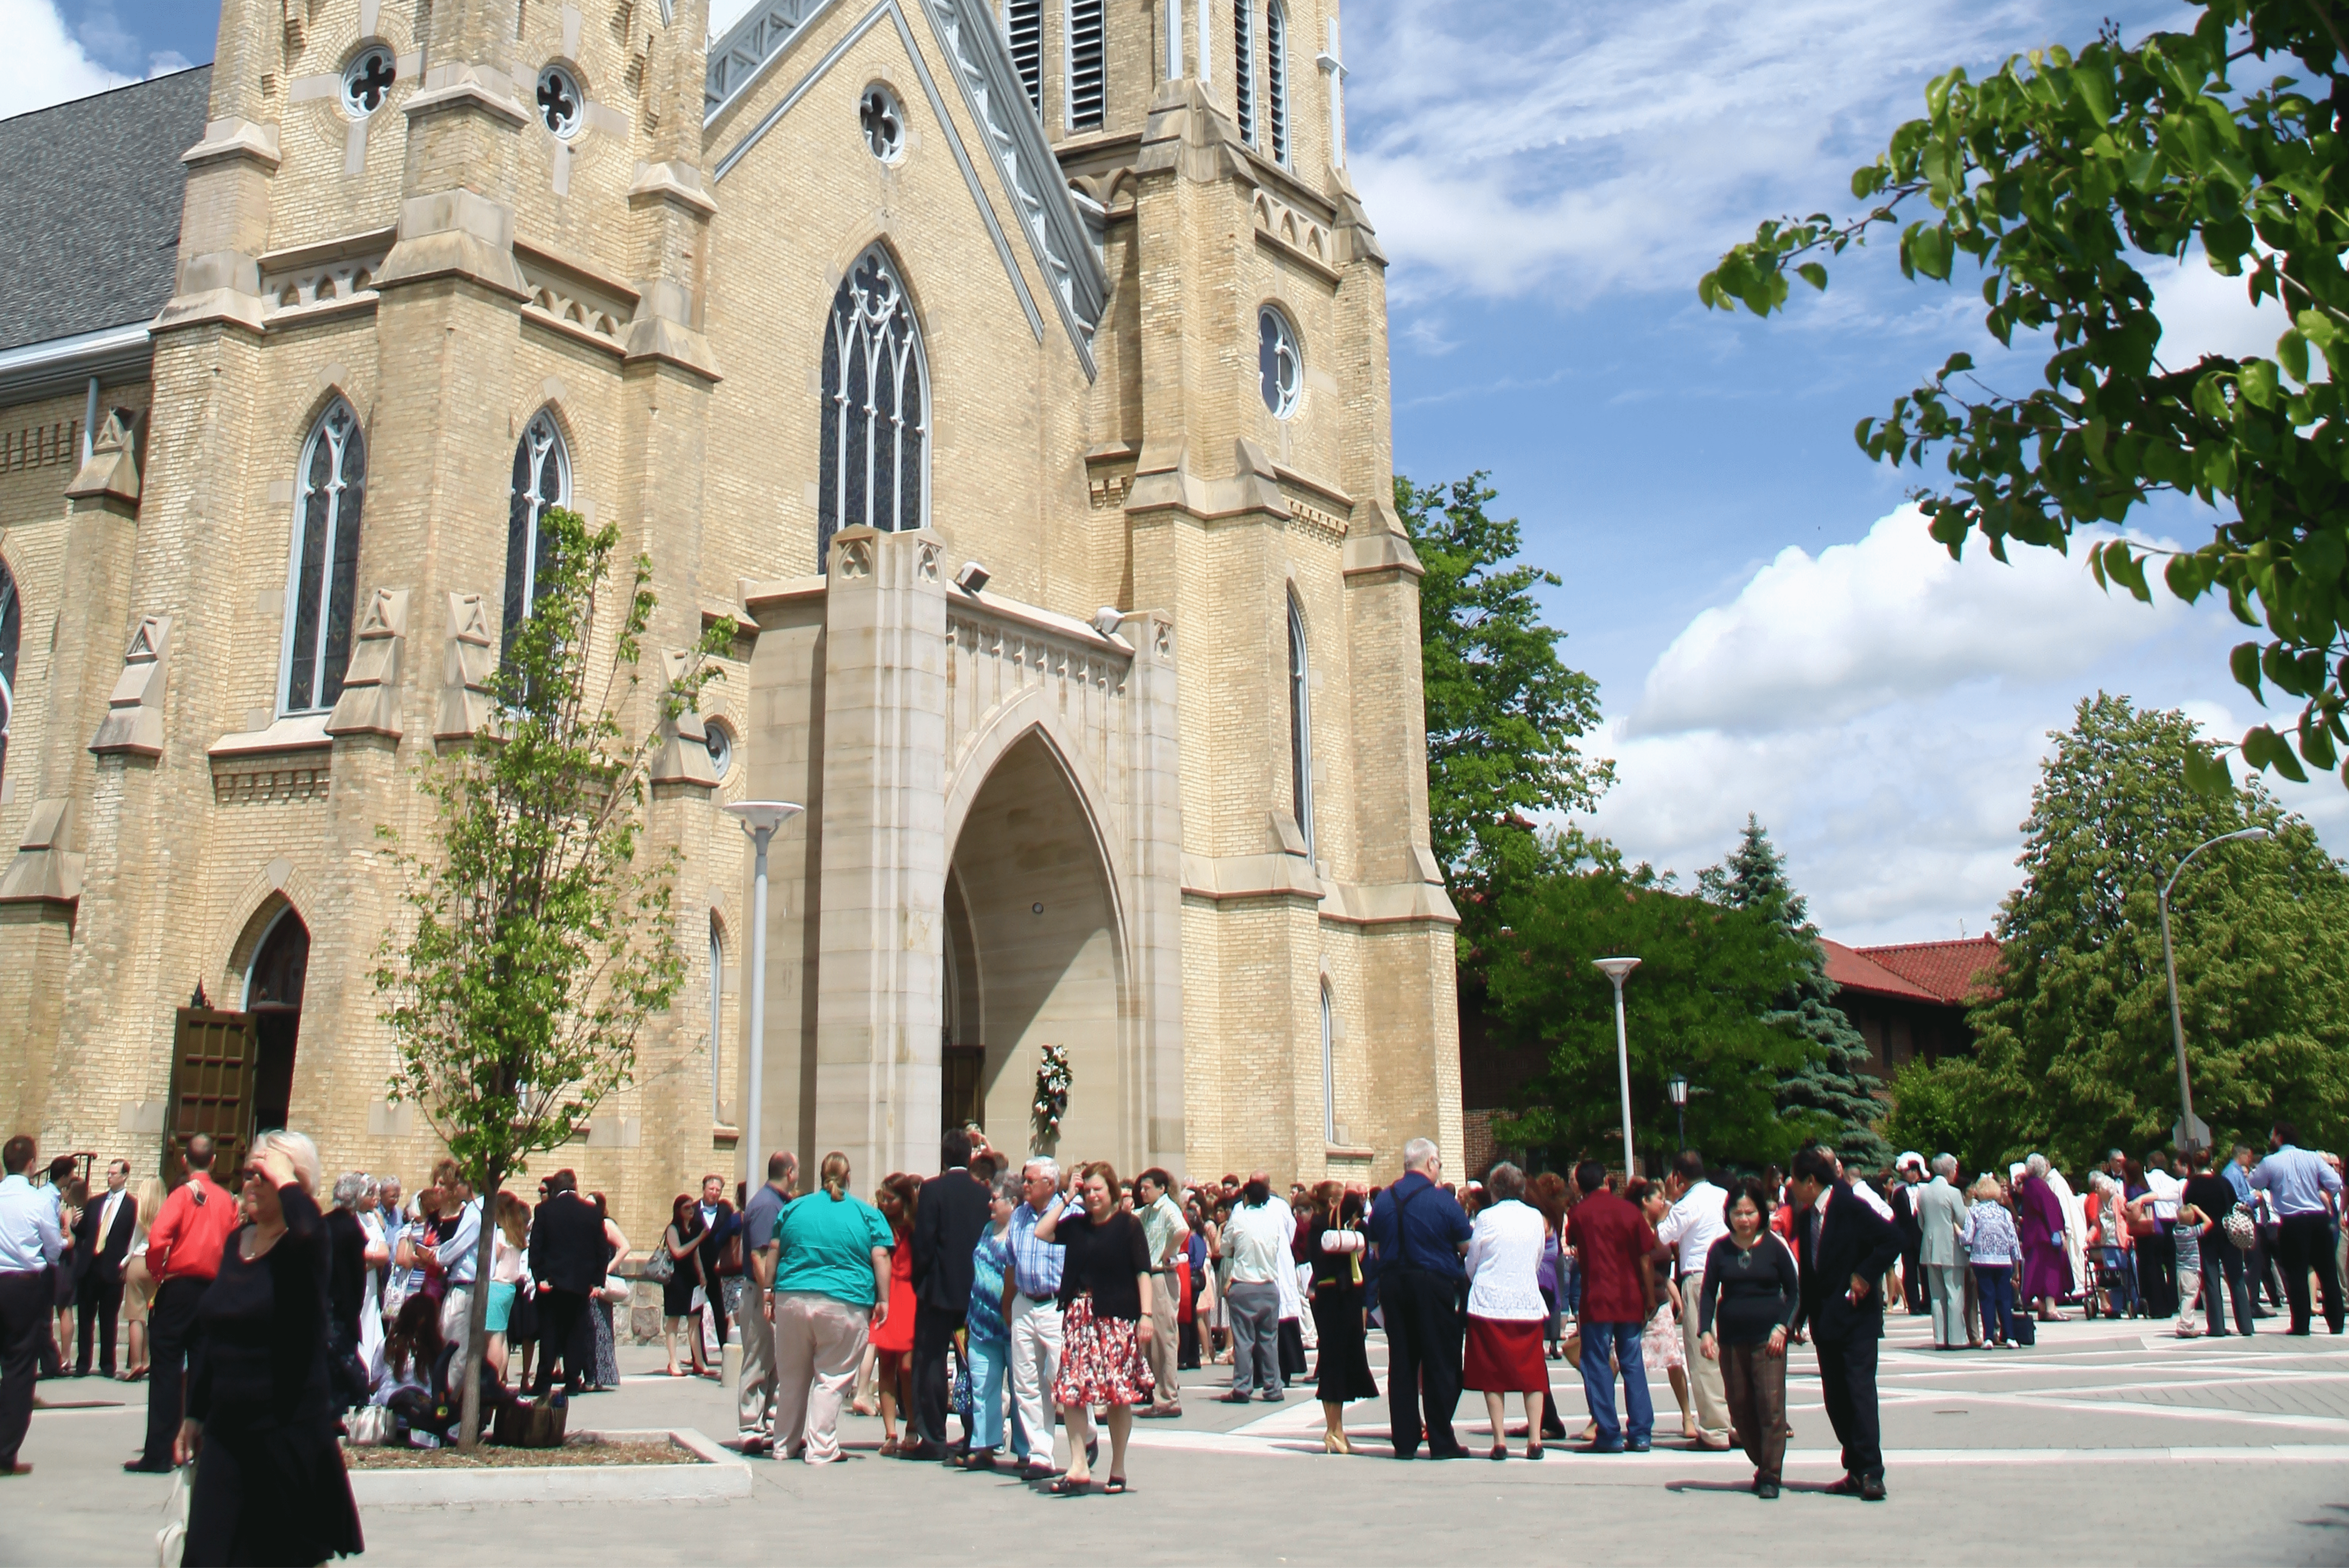 People gathered outside after Ordination 2013, Cathedral of Saint Andrew by Dave Taylor